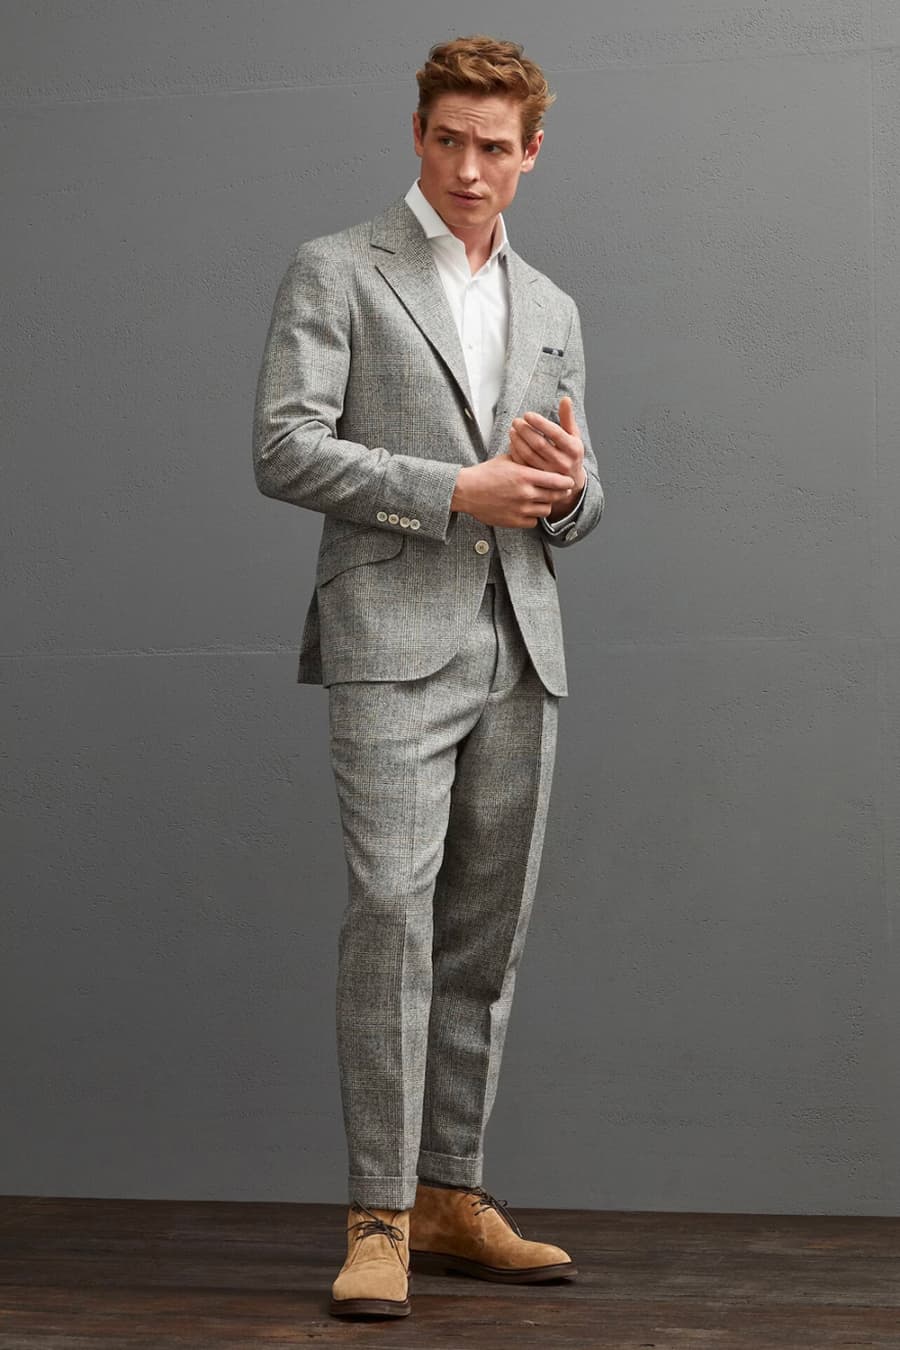 Men's grey wool check suit, white shirt and tan suede chukka boots outfit